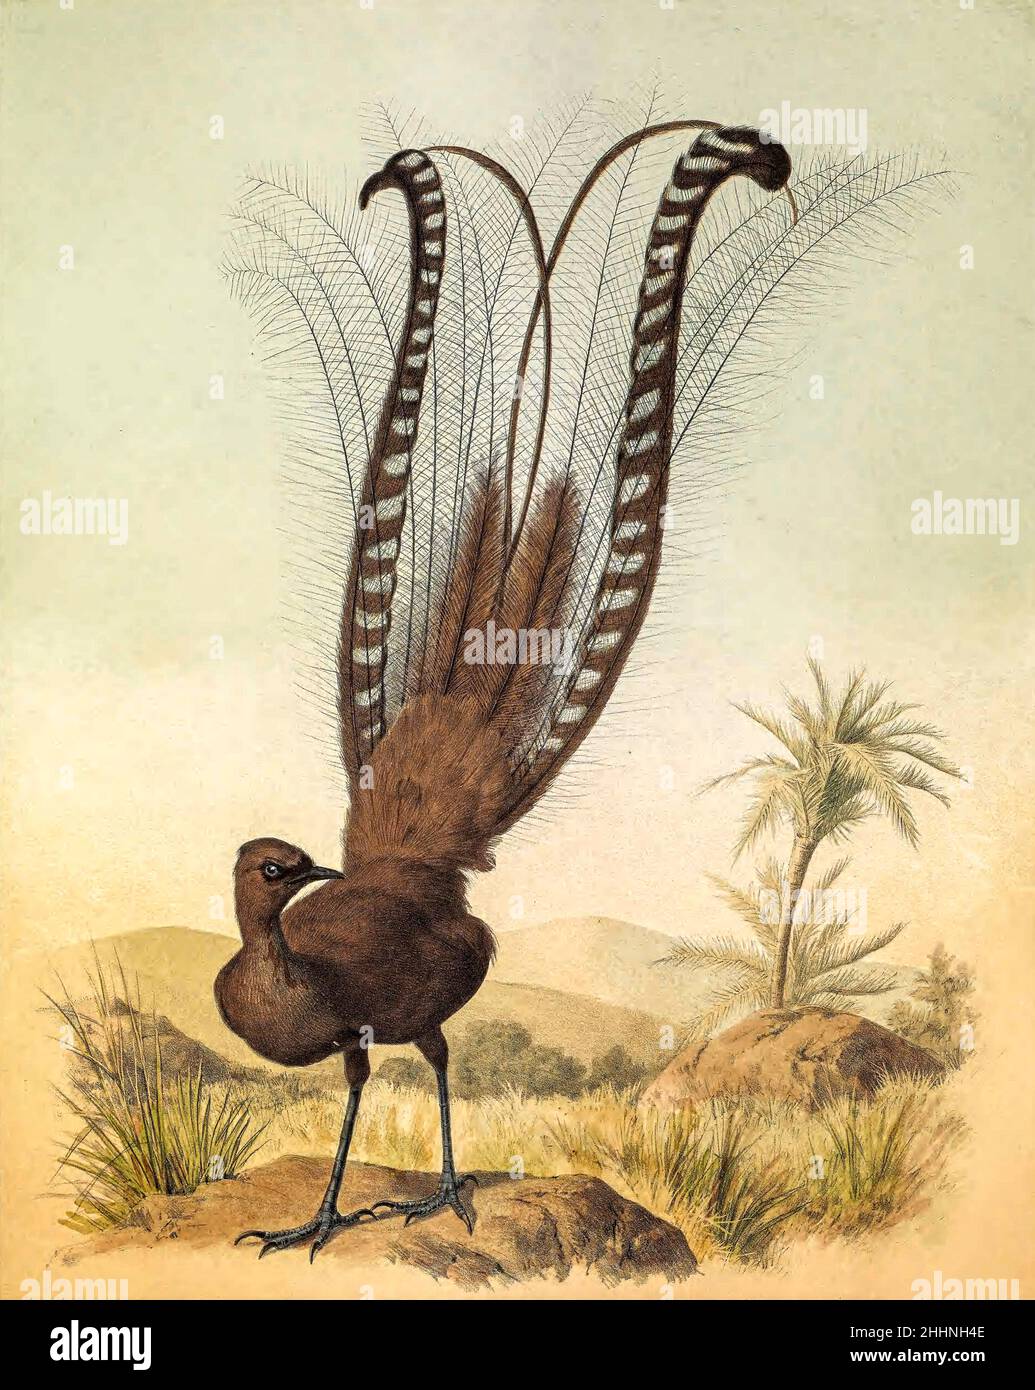 The superb lyrebird (Menura novaehollandiae here as Menura superba) is an Australian songbird, one of two species from the family Menuridae. It is one of the world's largest songbirds, and is renowned for its elaborate tail and courtship displays, and its excellent mimicry. The species is endemic to Australia and is found in forest in the southeast of the country tinted lithograph Illustrated by Joseph Smit, from the book ' The beautiful and curious birds of the world ' by Charles Barney Cory, Published by the Author for the subscribers Boston USA 1883. Plates are tinted lithographs, some with Stock Photo